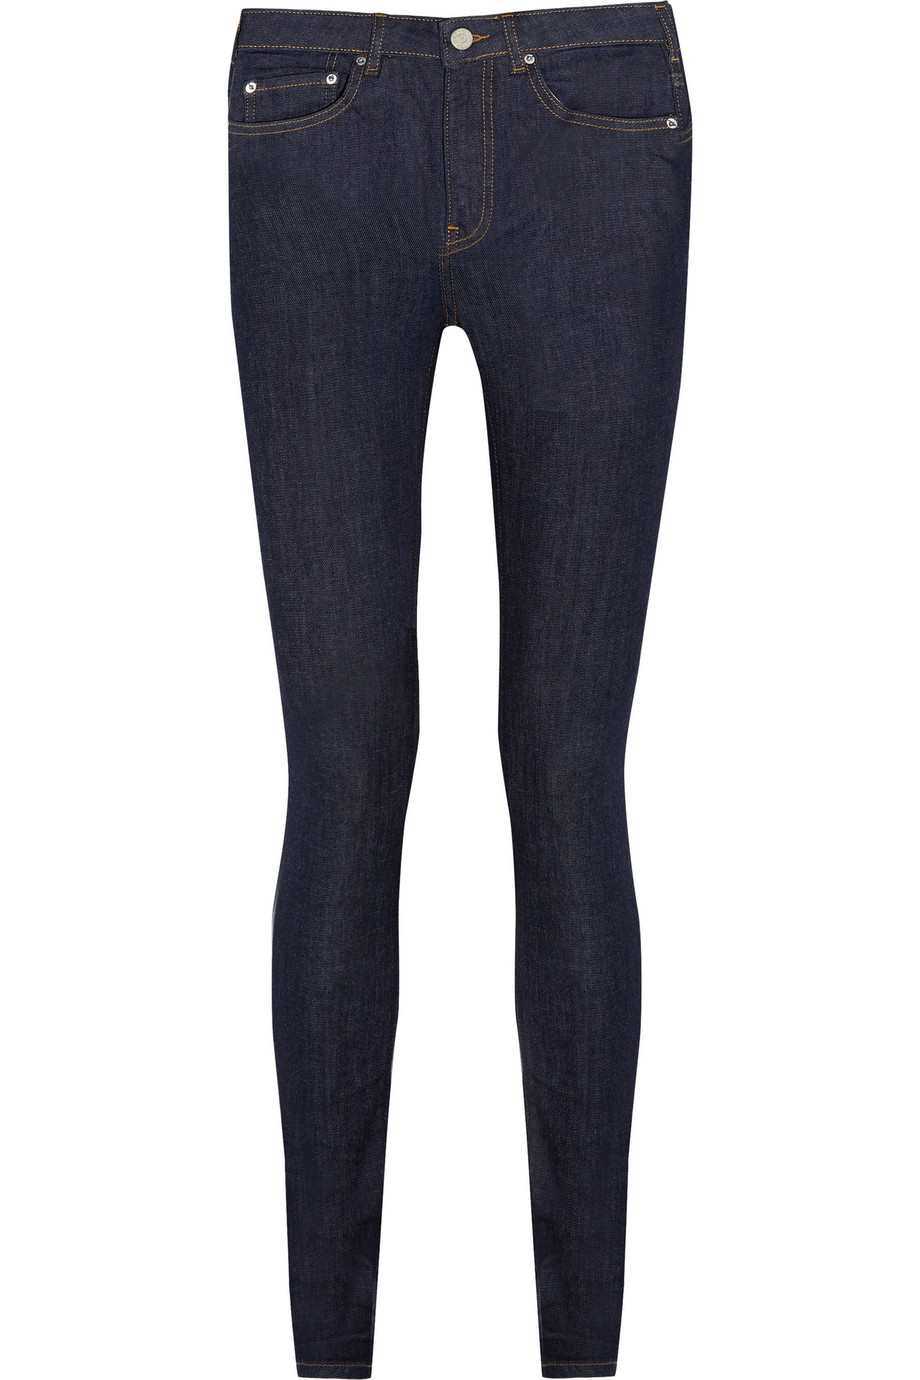 Lyst - Acne Studios Pin Raw Reform High-Rise Skinny Jeans in Blue